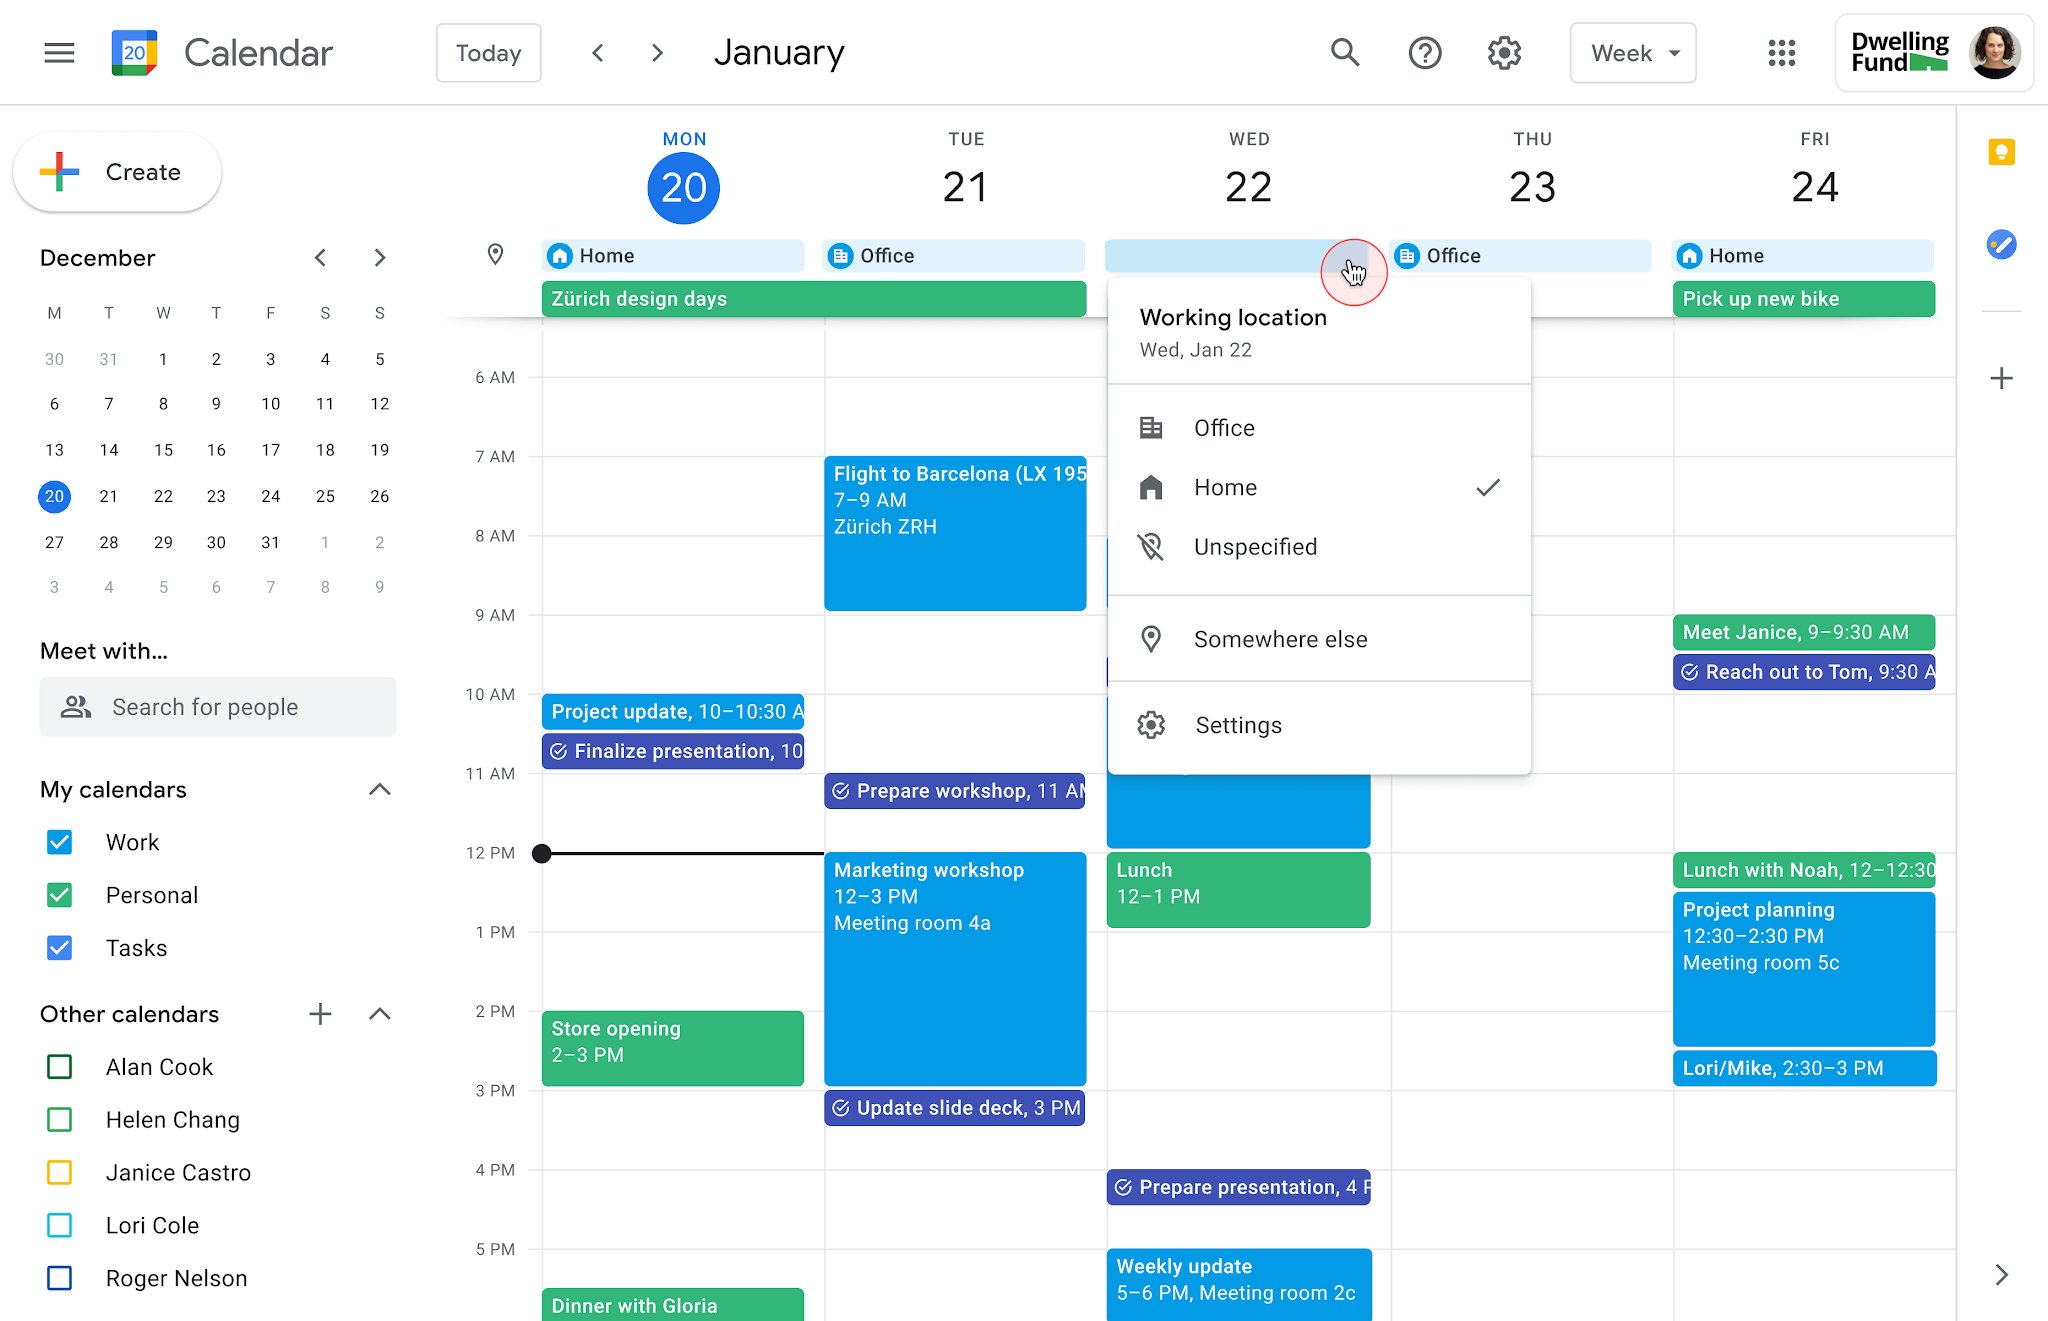 how-to-reschedule-appointments-by-dragging-and-dropping-calendar-events